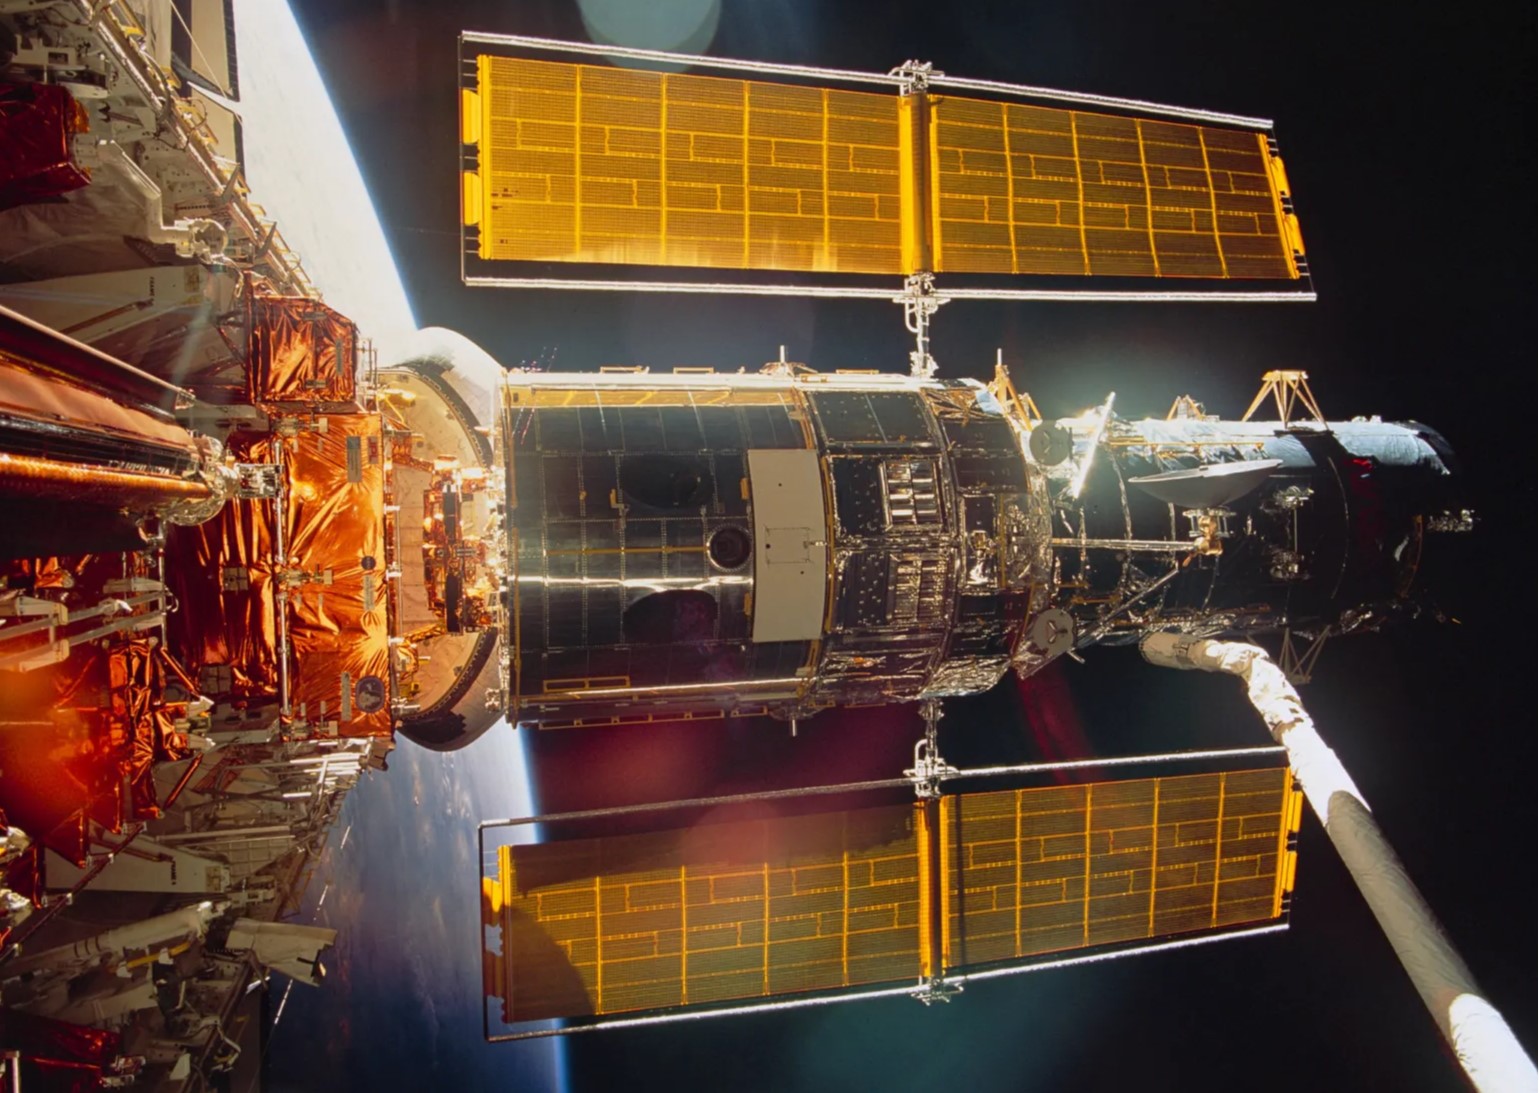 One of the most important spacecraft in the history of space exploration began its mission thirty-four years ago